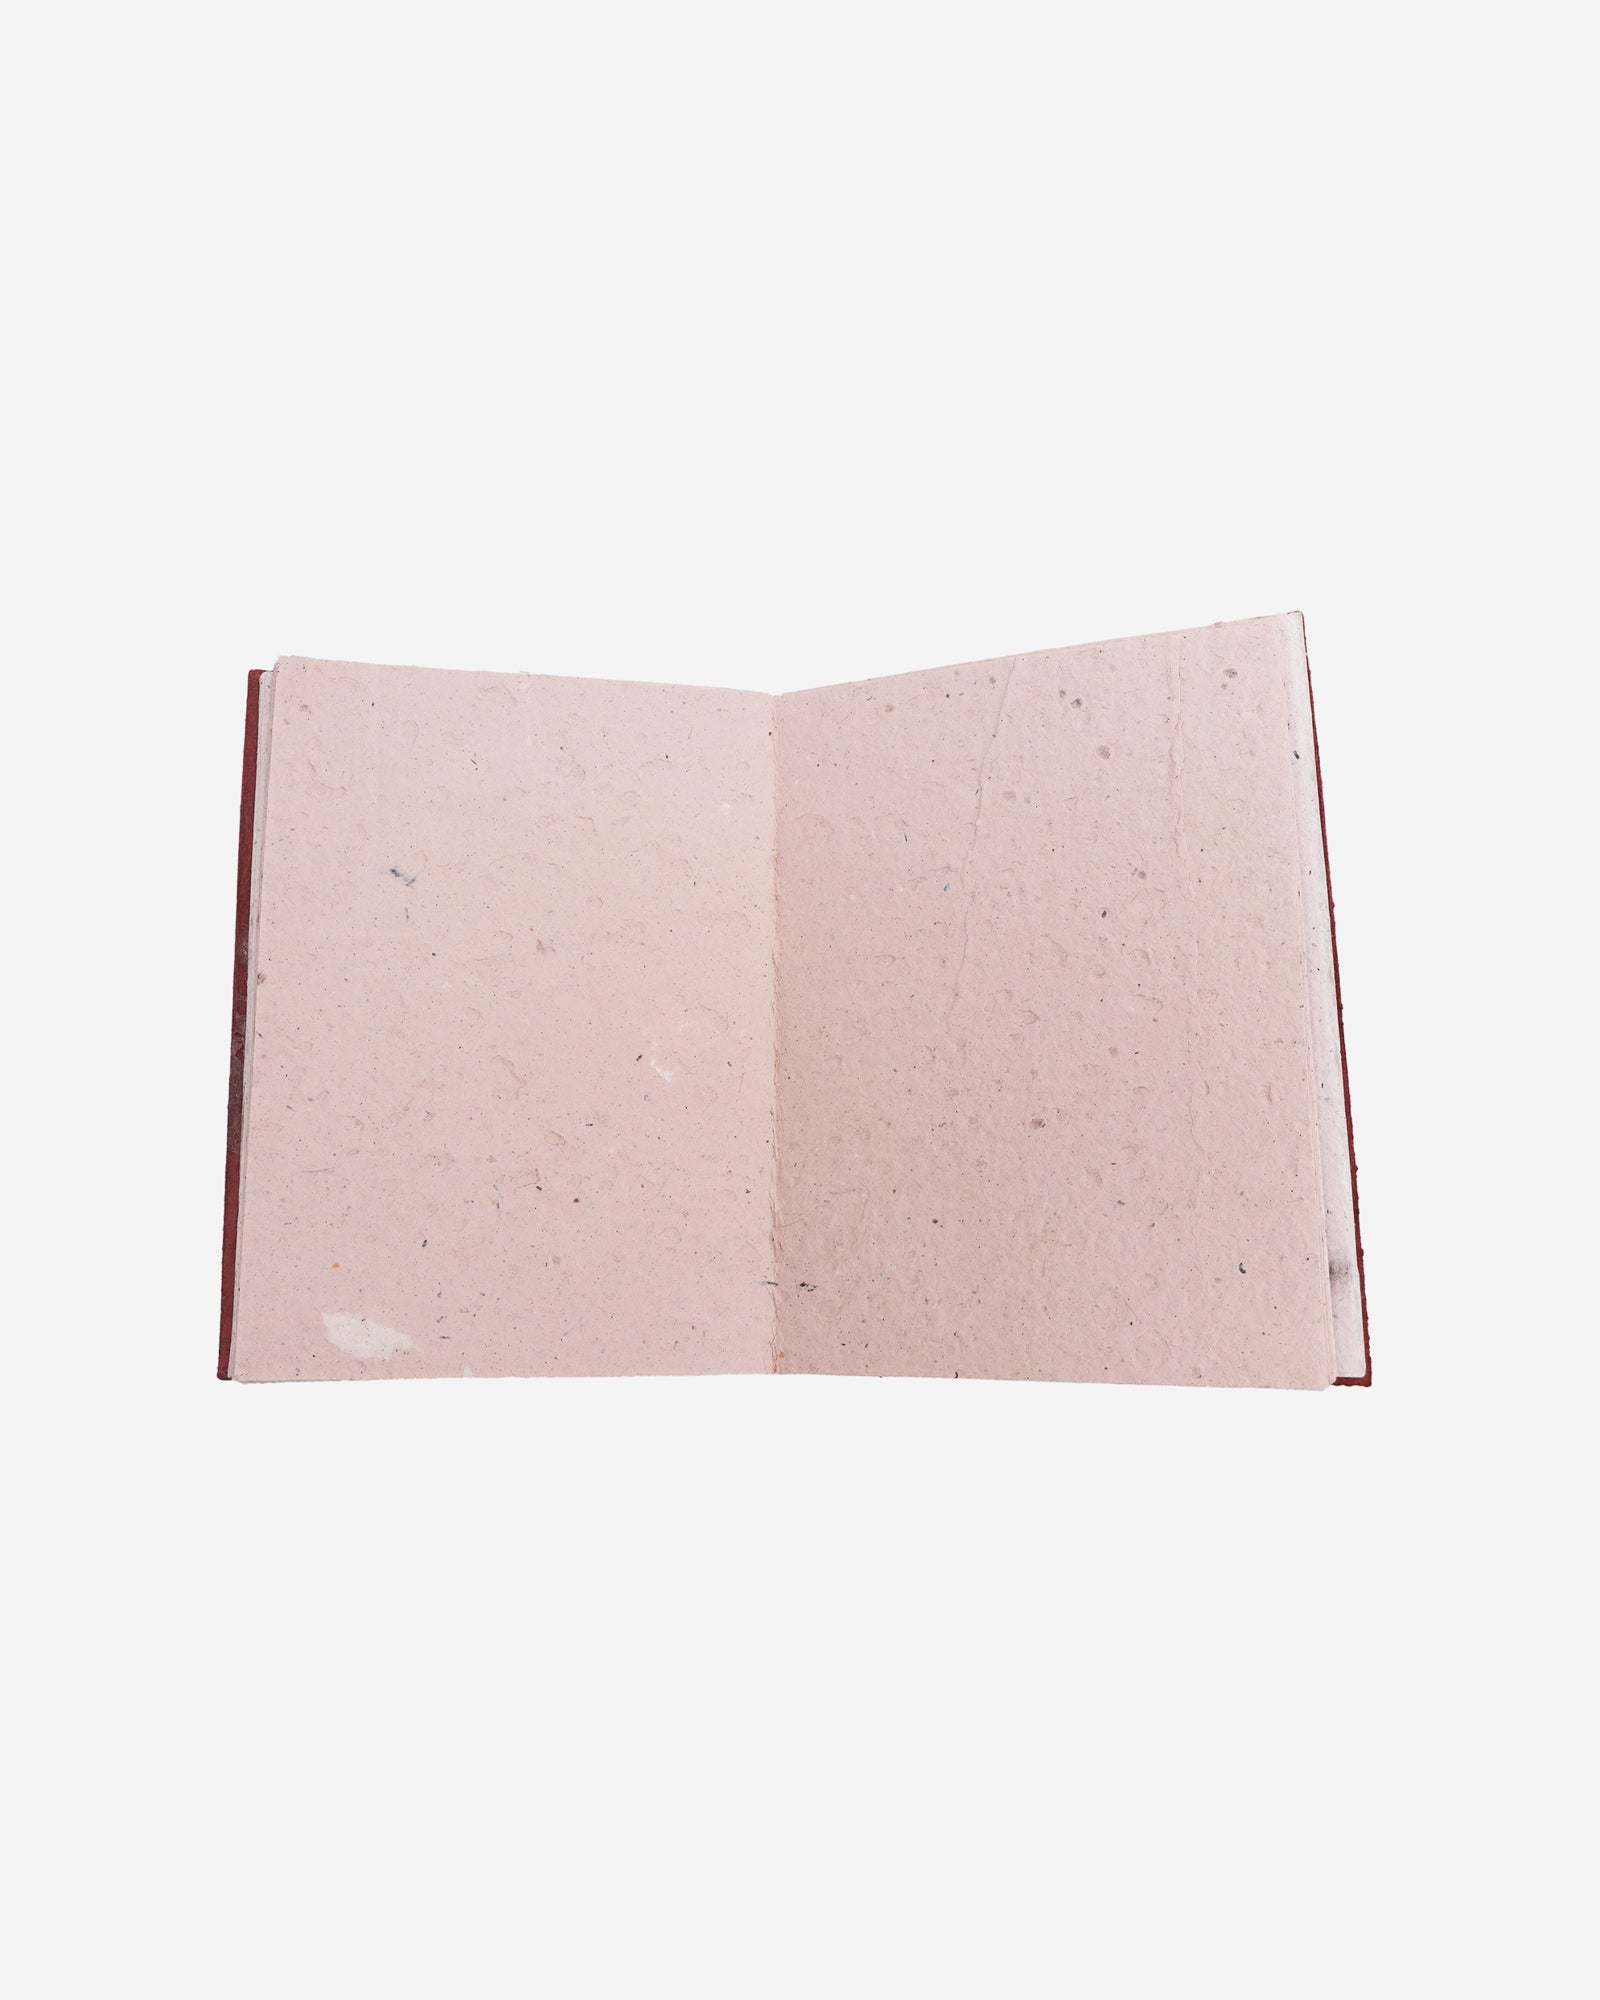 Terracotta Leather Diary